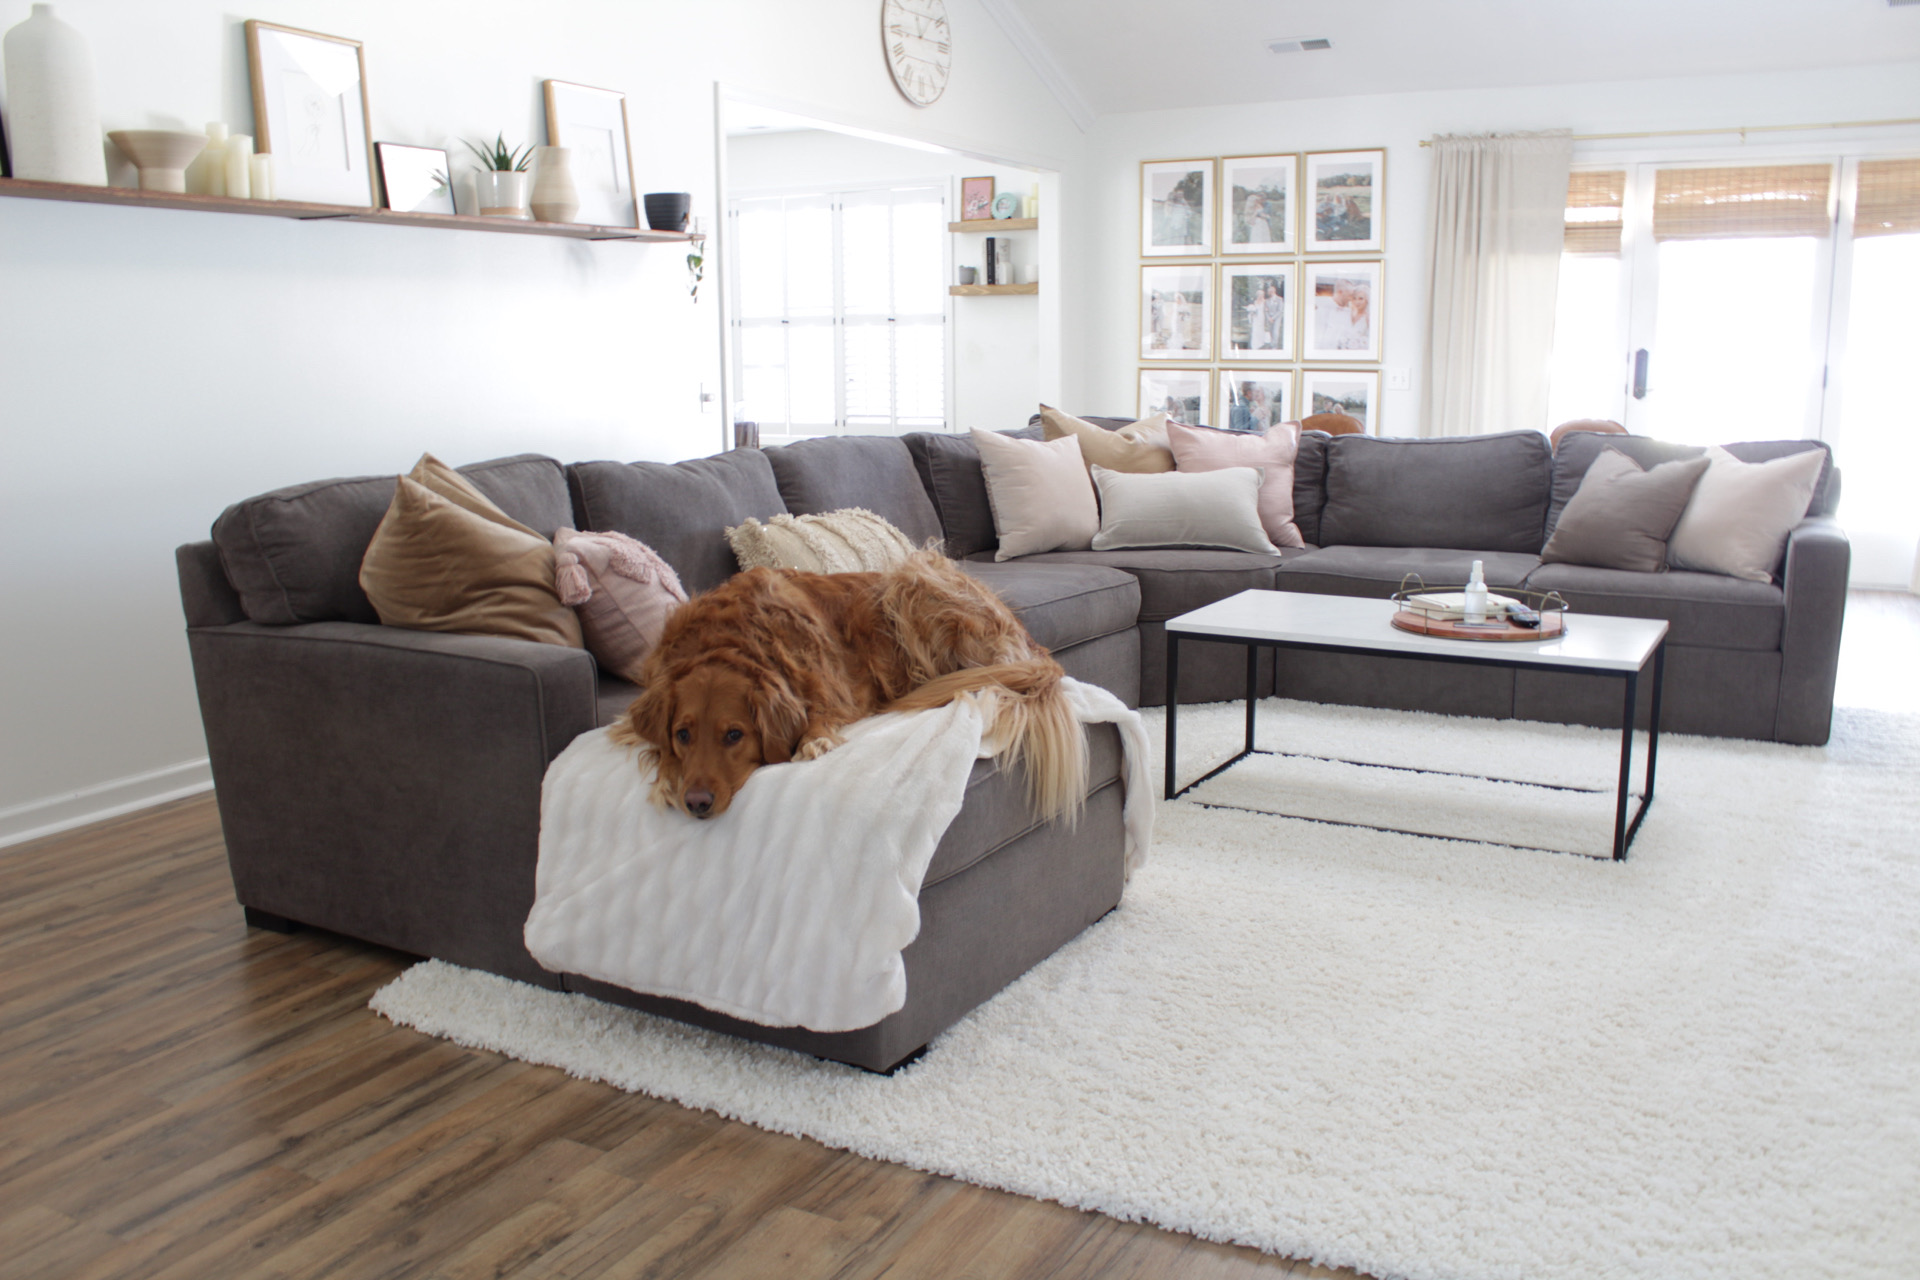 macy's radley sectional review